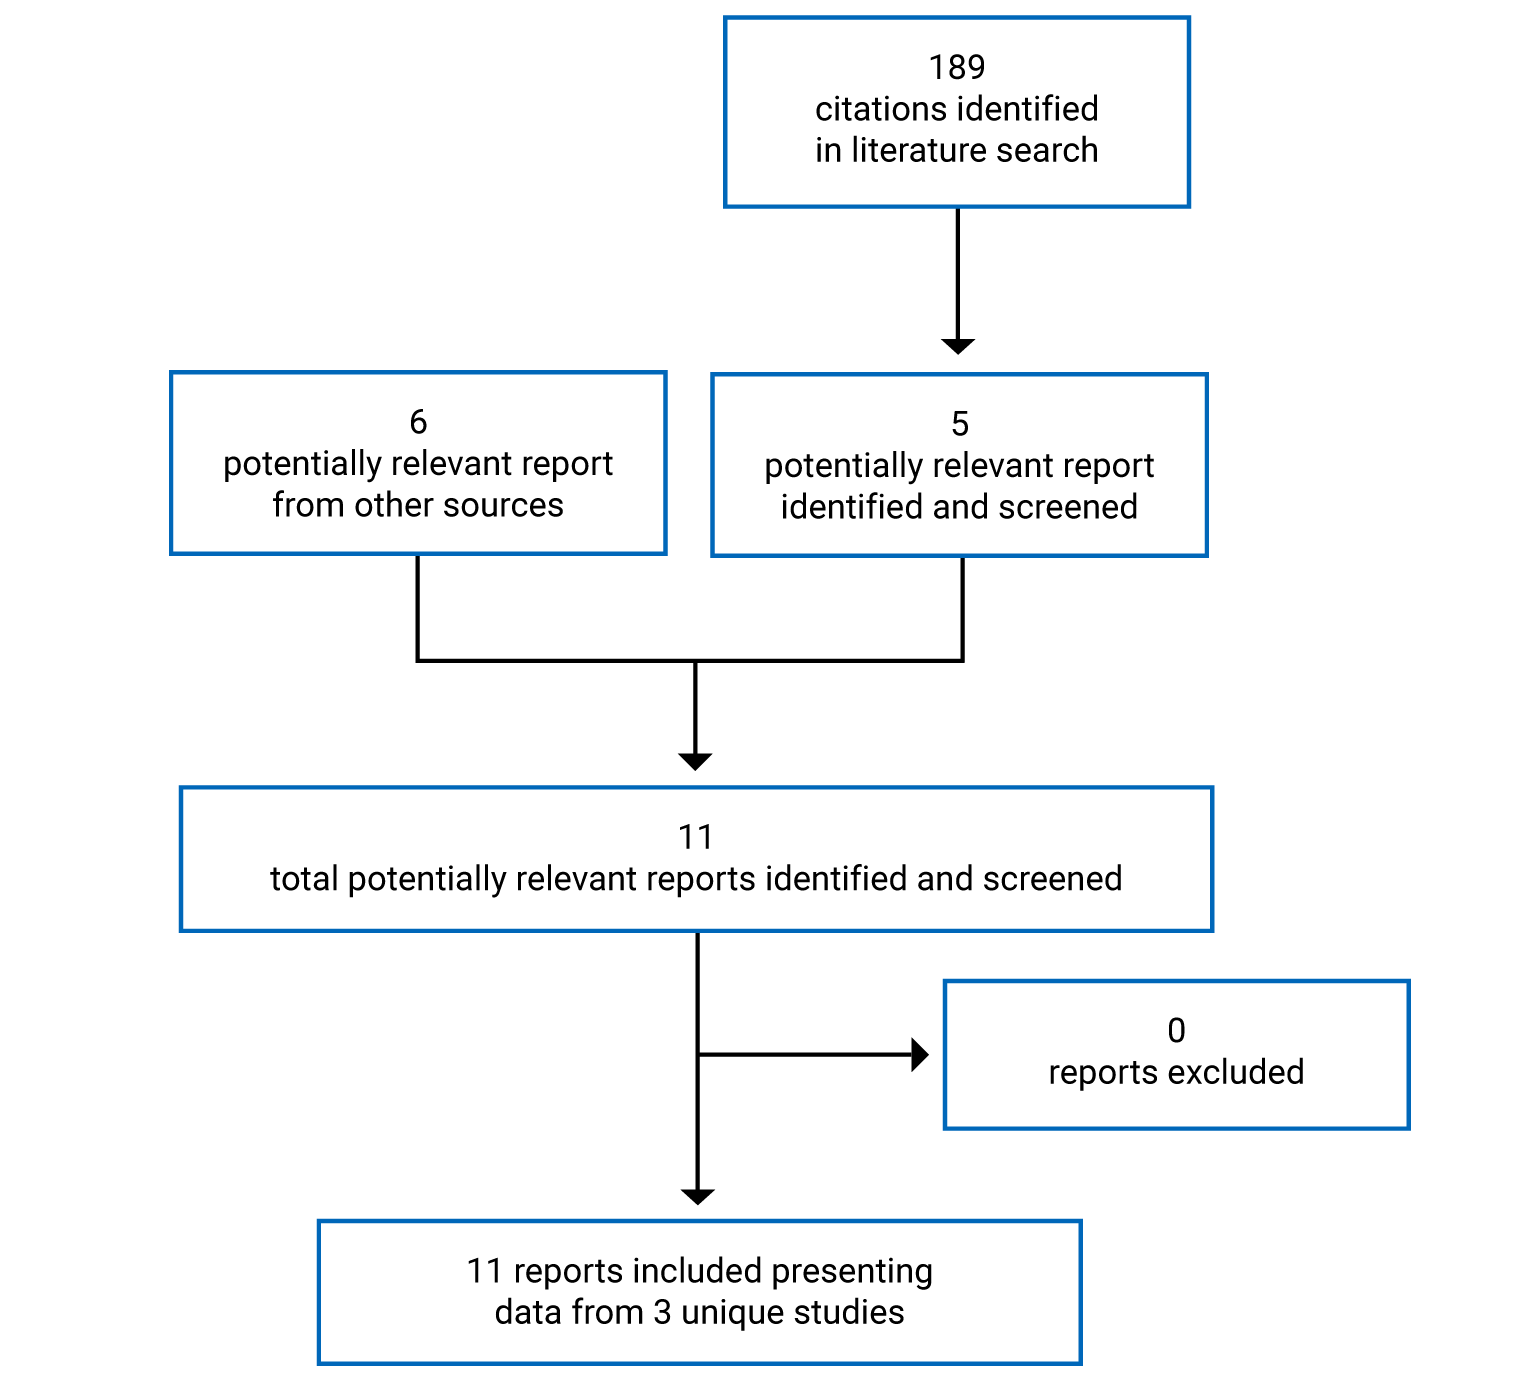 A total of 189 citations were identified in the literature search, from which 5 potentially relevant reports were identified and screened; 6 potentially relevant reports from other sources were identified as well. None of these reports were excluded. In total, 11 reports presenting data from 3 unique studies are included in the review.